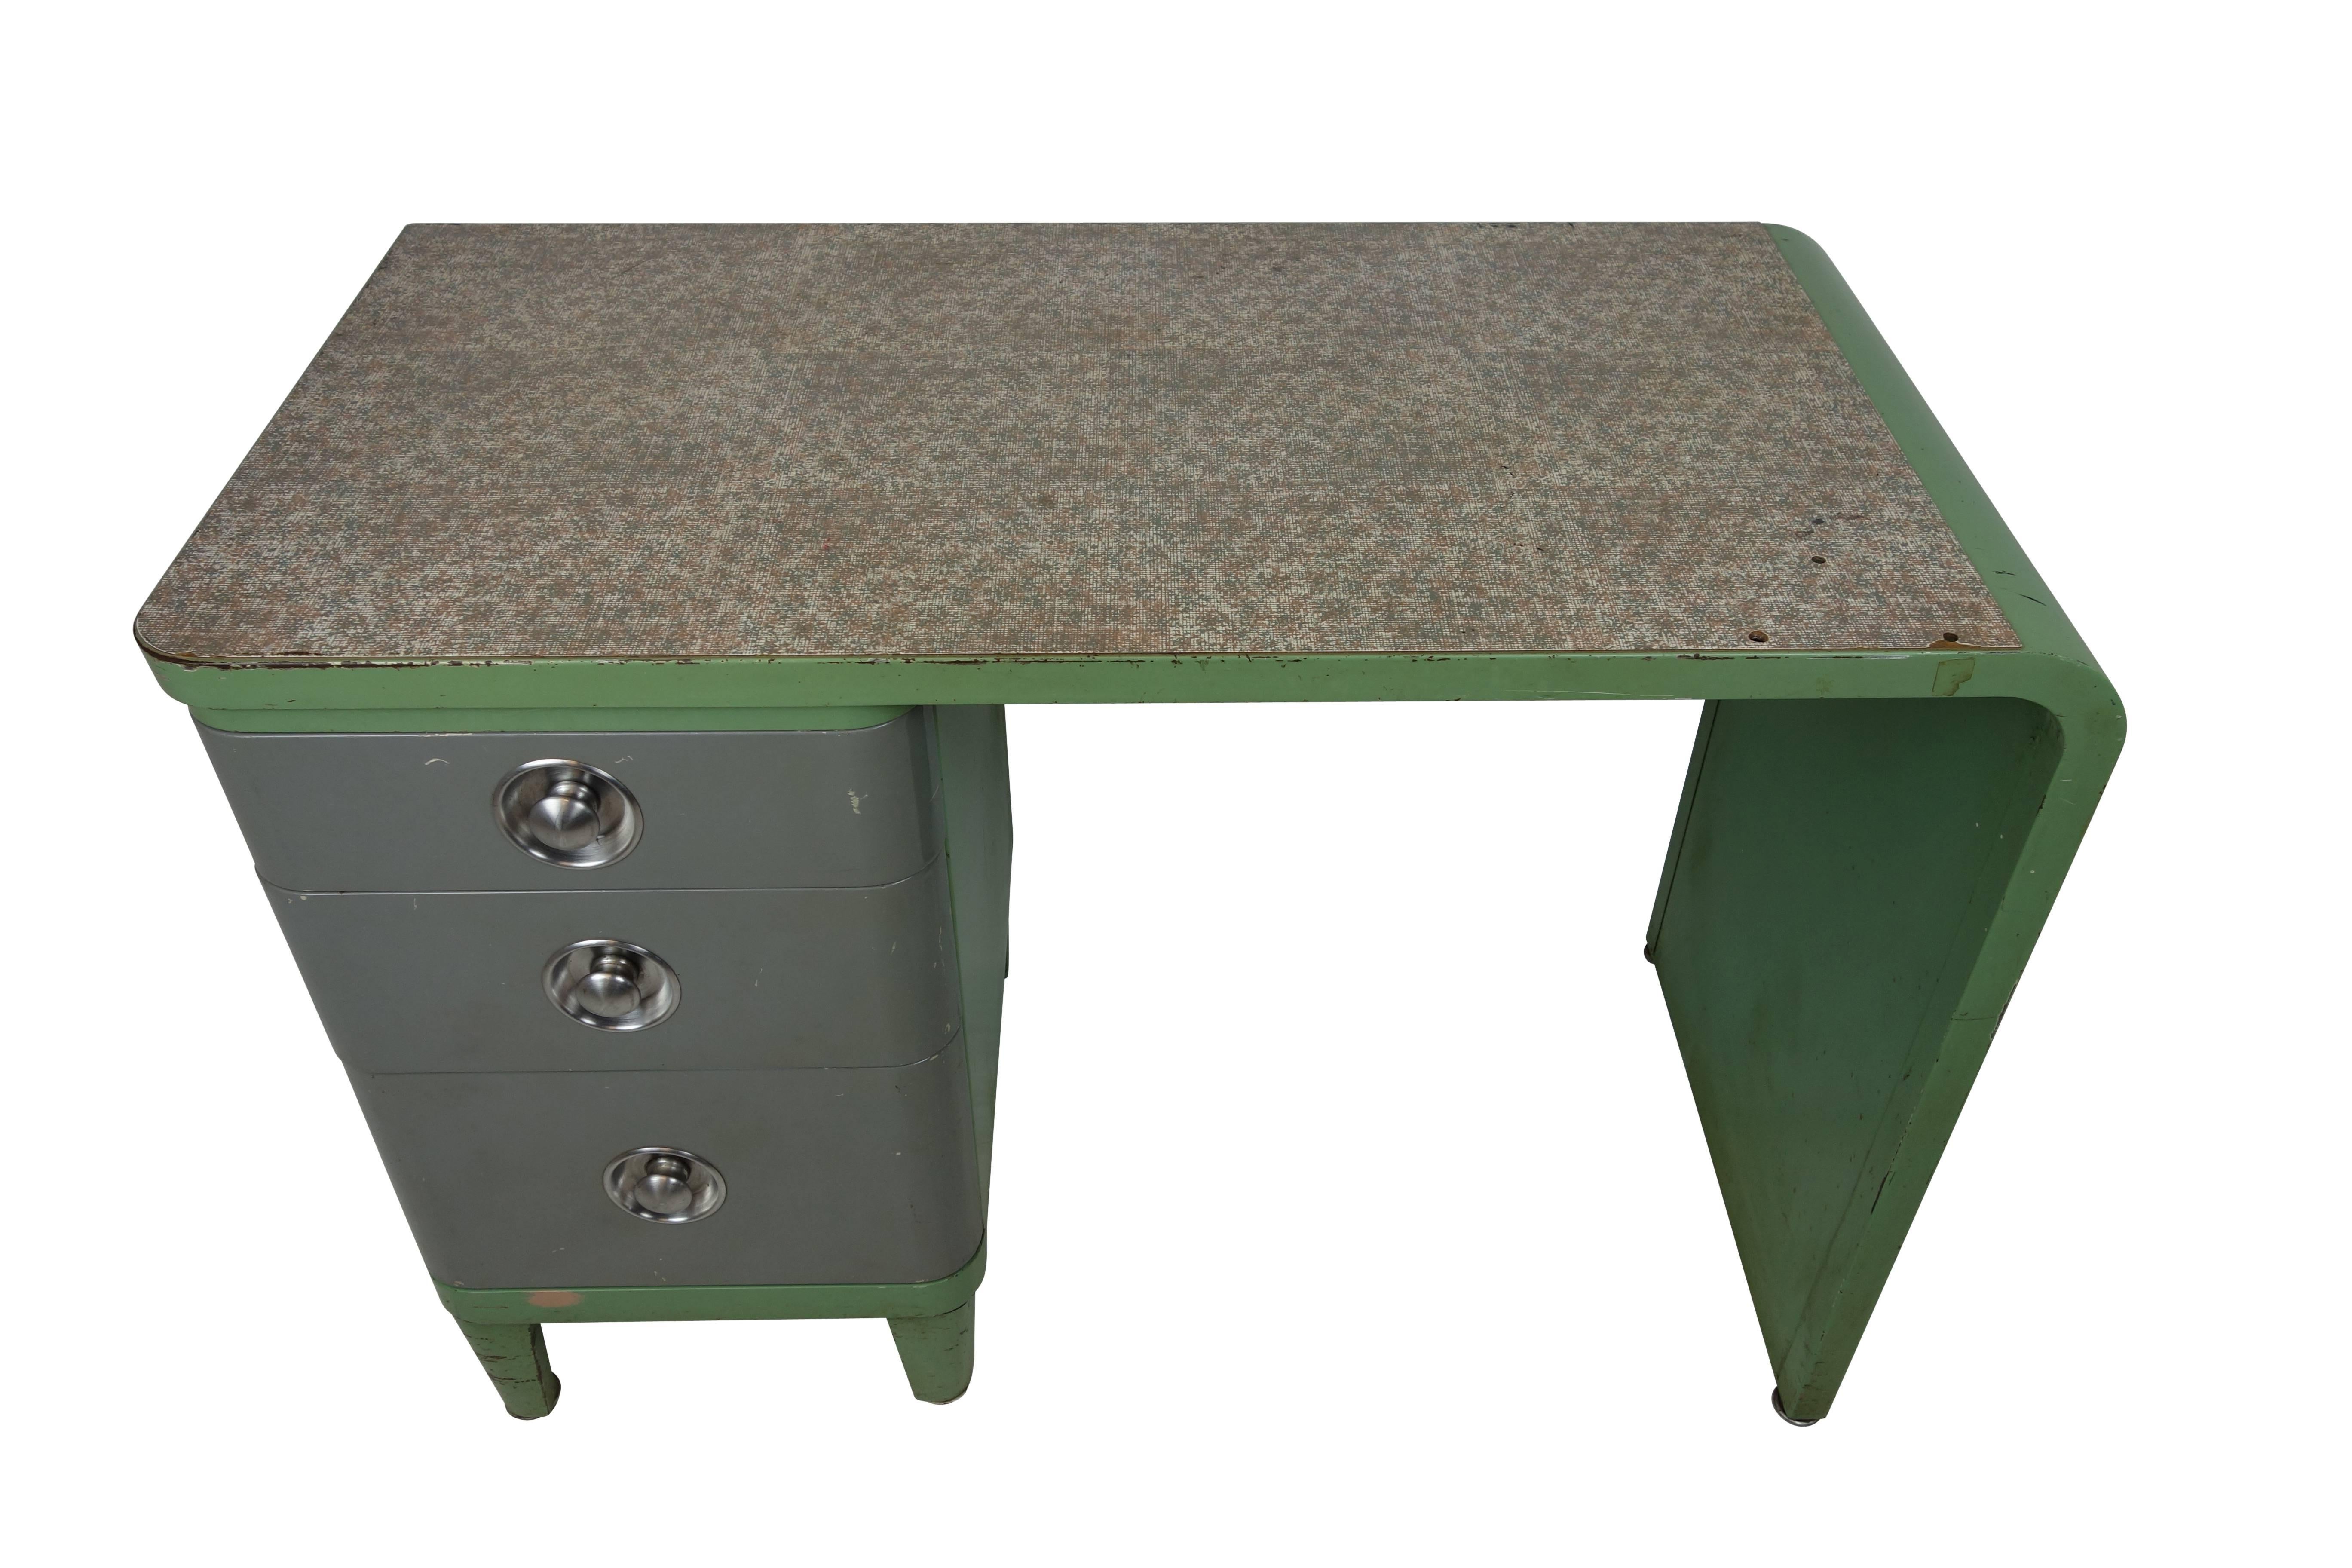 This is an Art Deco Simmons Company Furniture enameled steel desk, designed by Norman Bel Geddes, circa 1930.